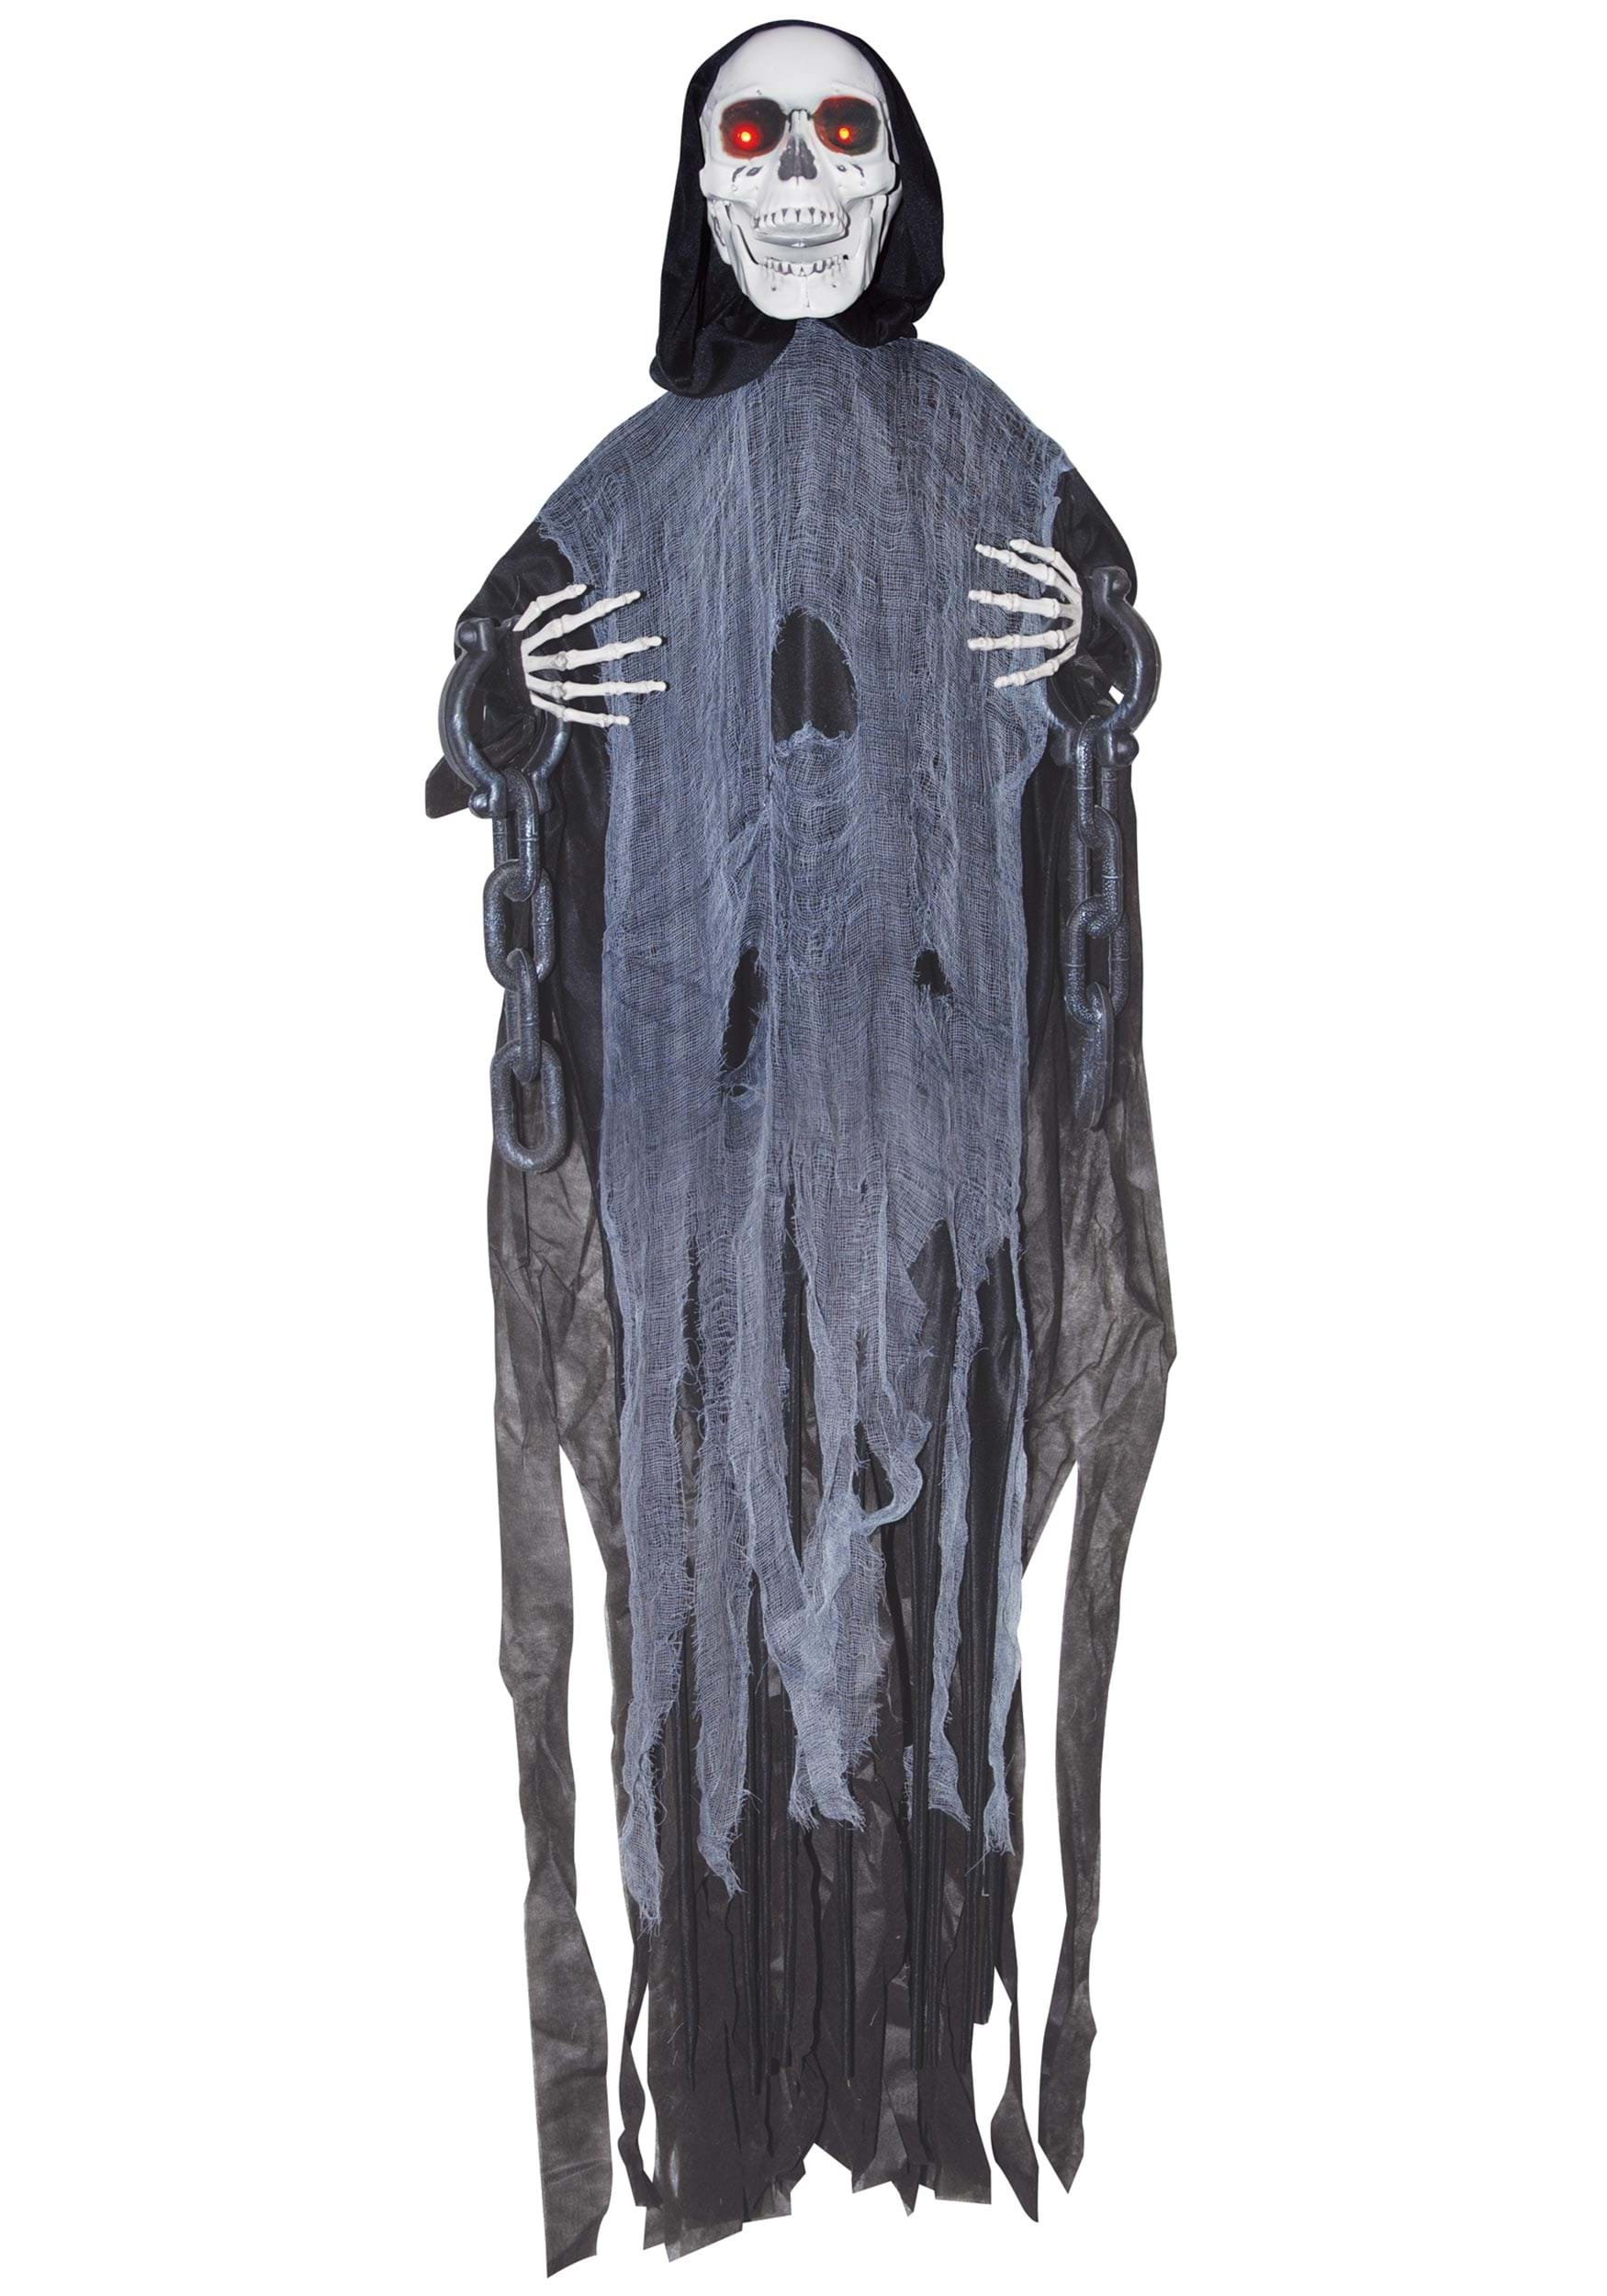 Hanging Animated Reaper in Chains Halloween Decoration